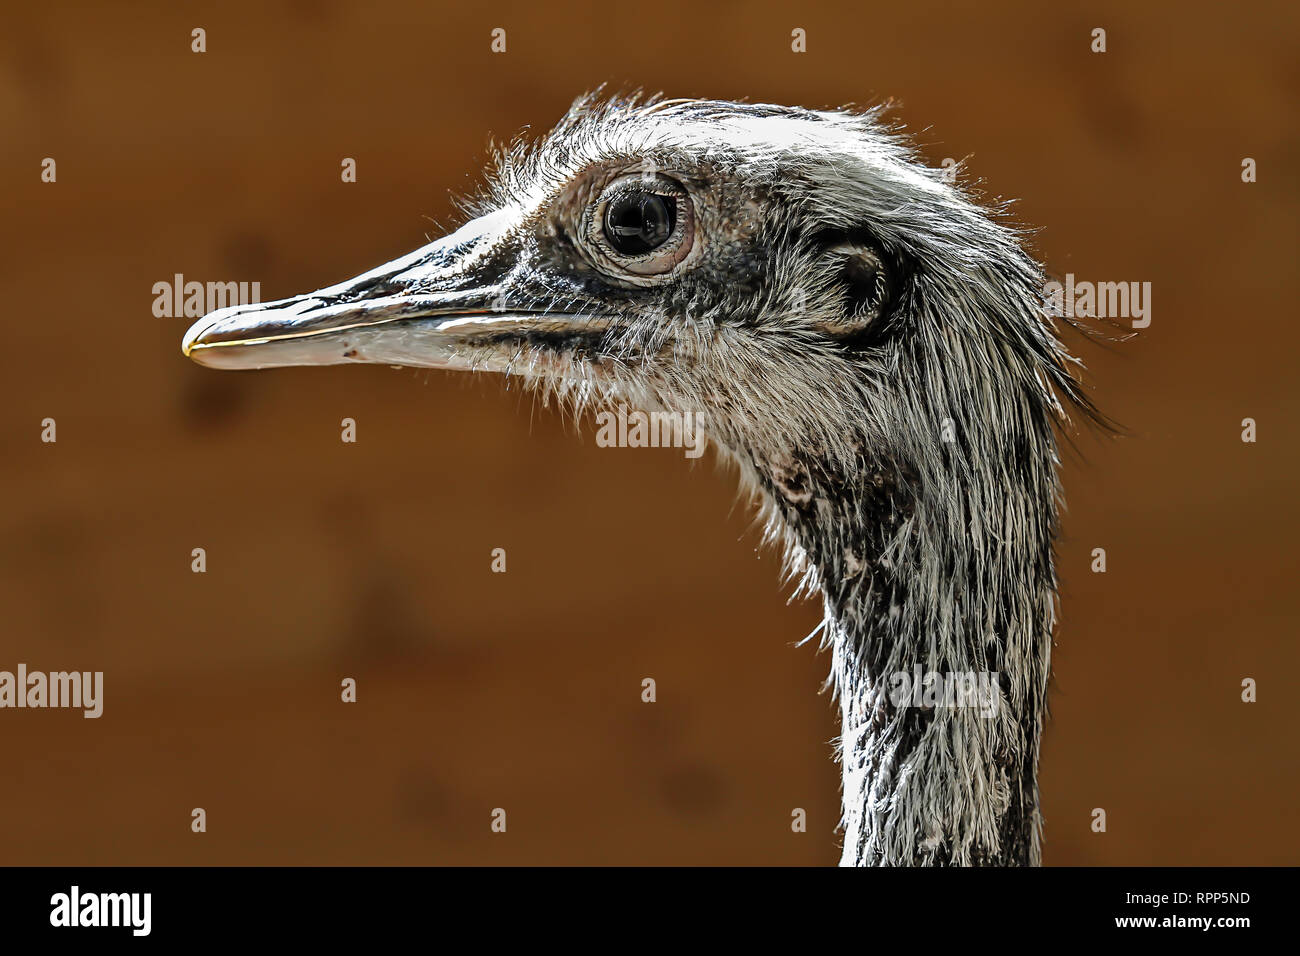 ostrich emu portrait head in front of blurred background Stock Photo